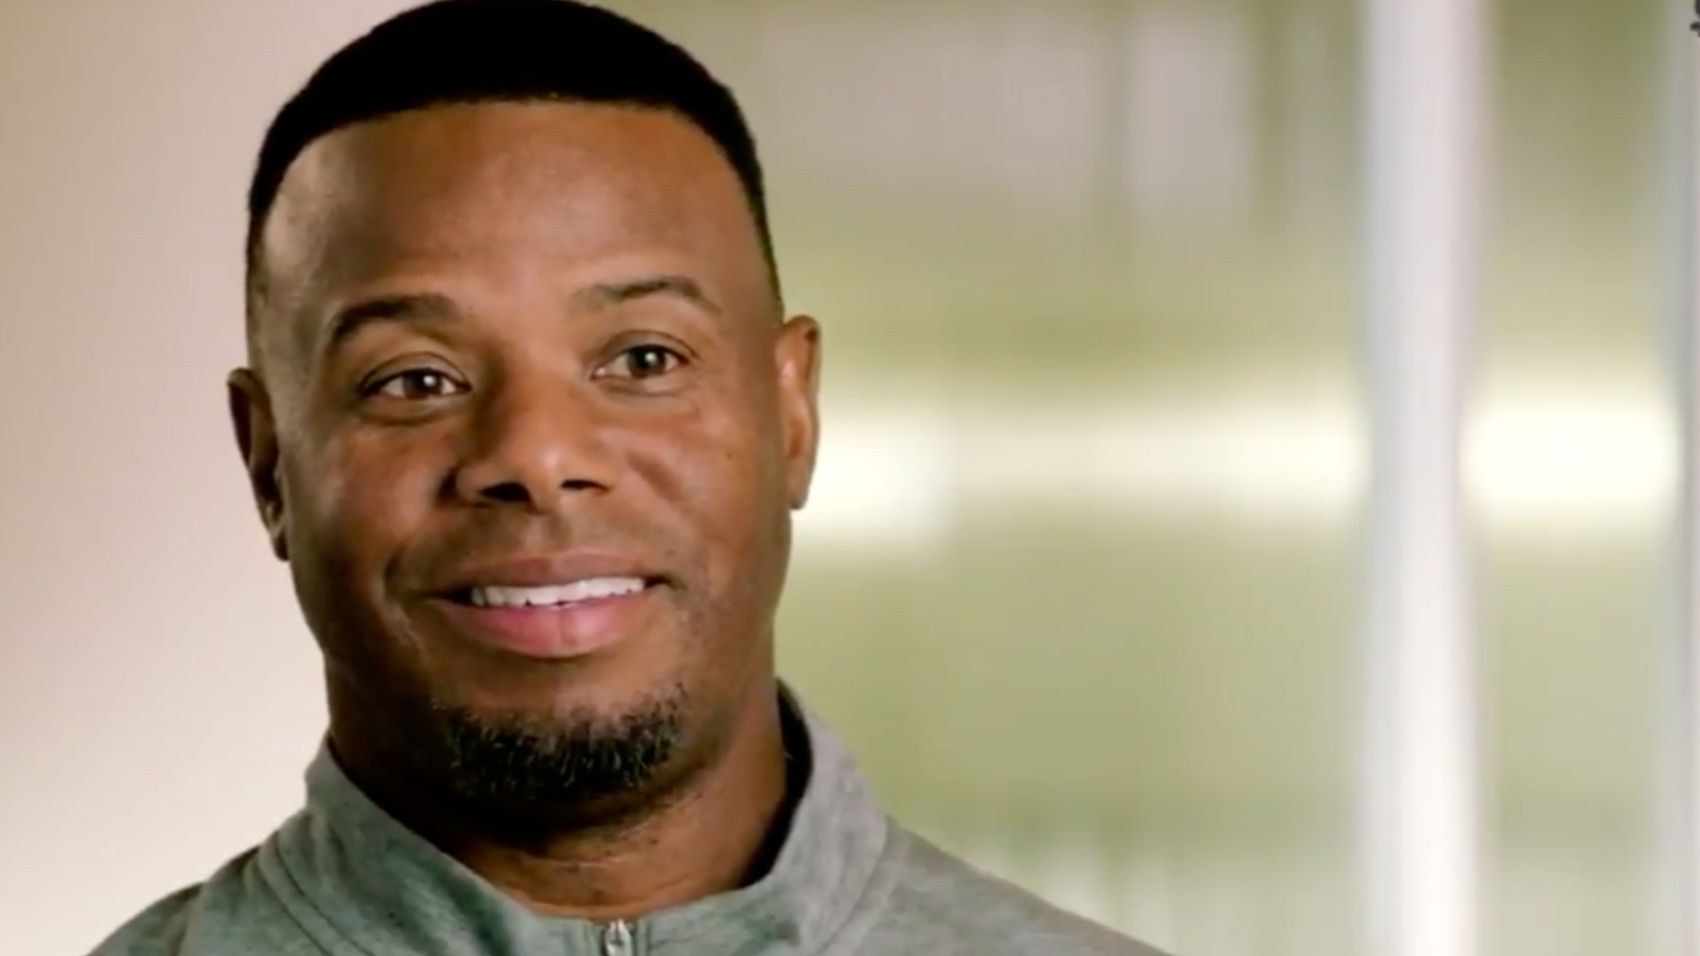 Griffey never wanted to play for Yankees after childhood